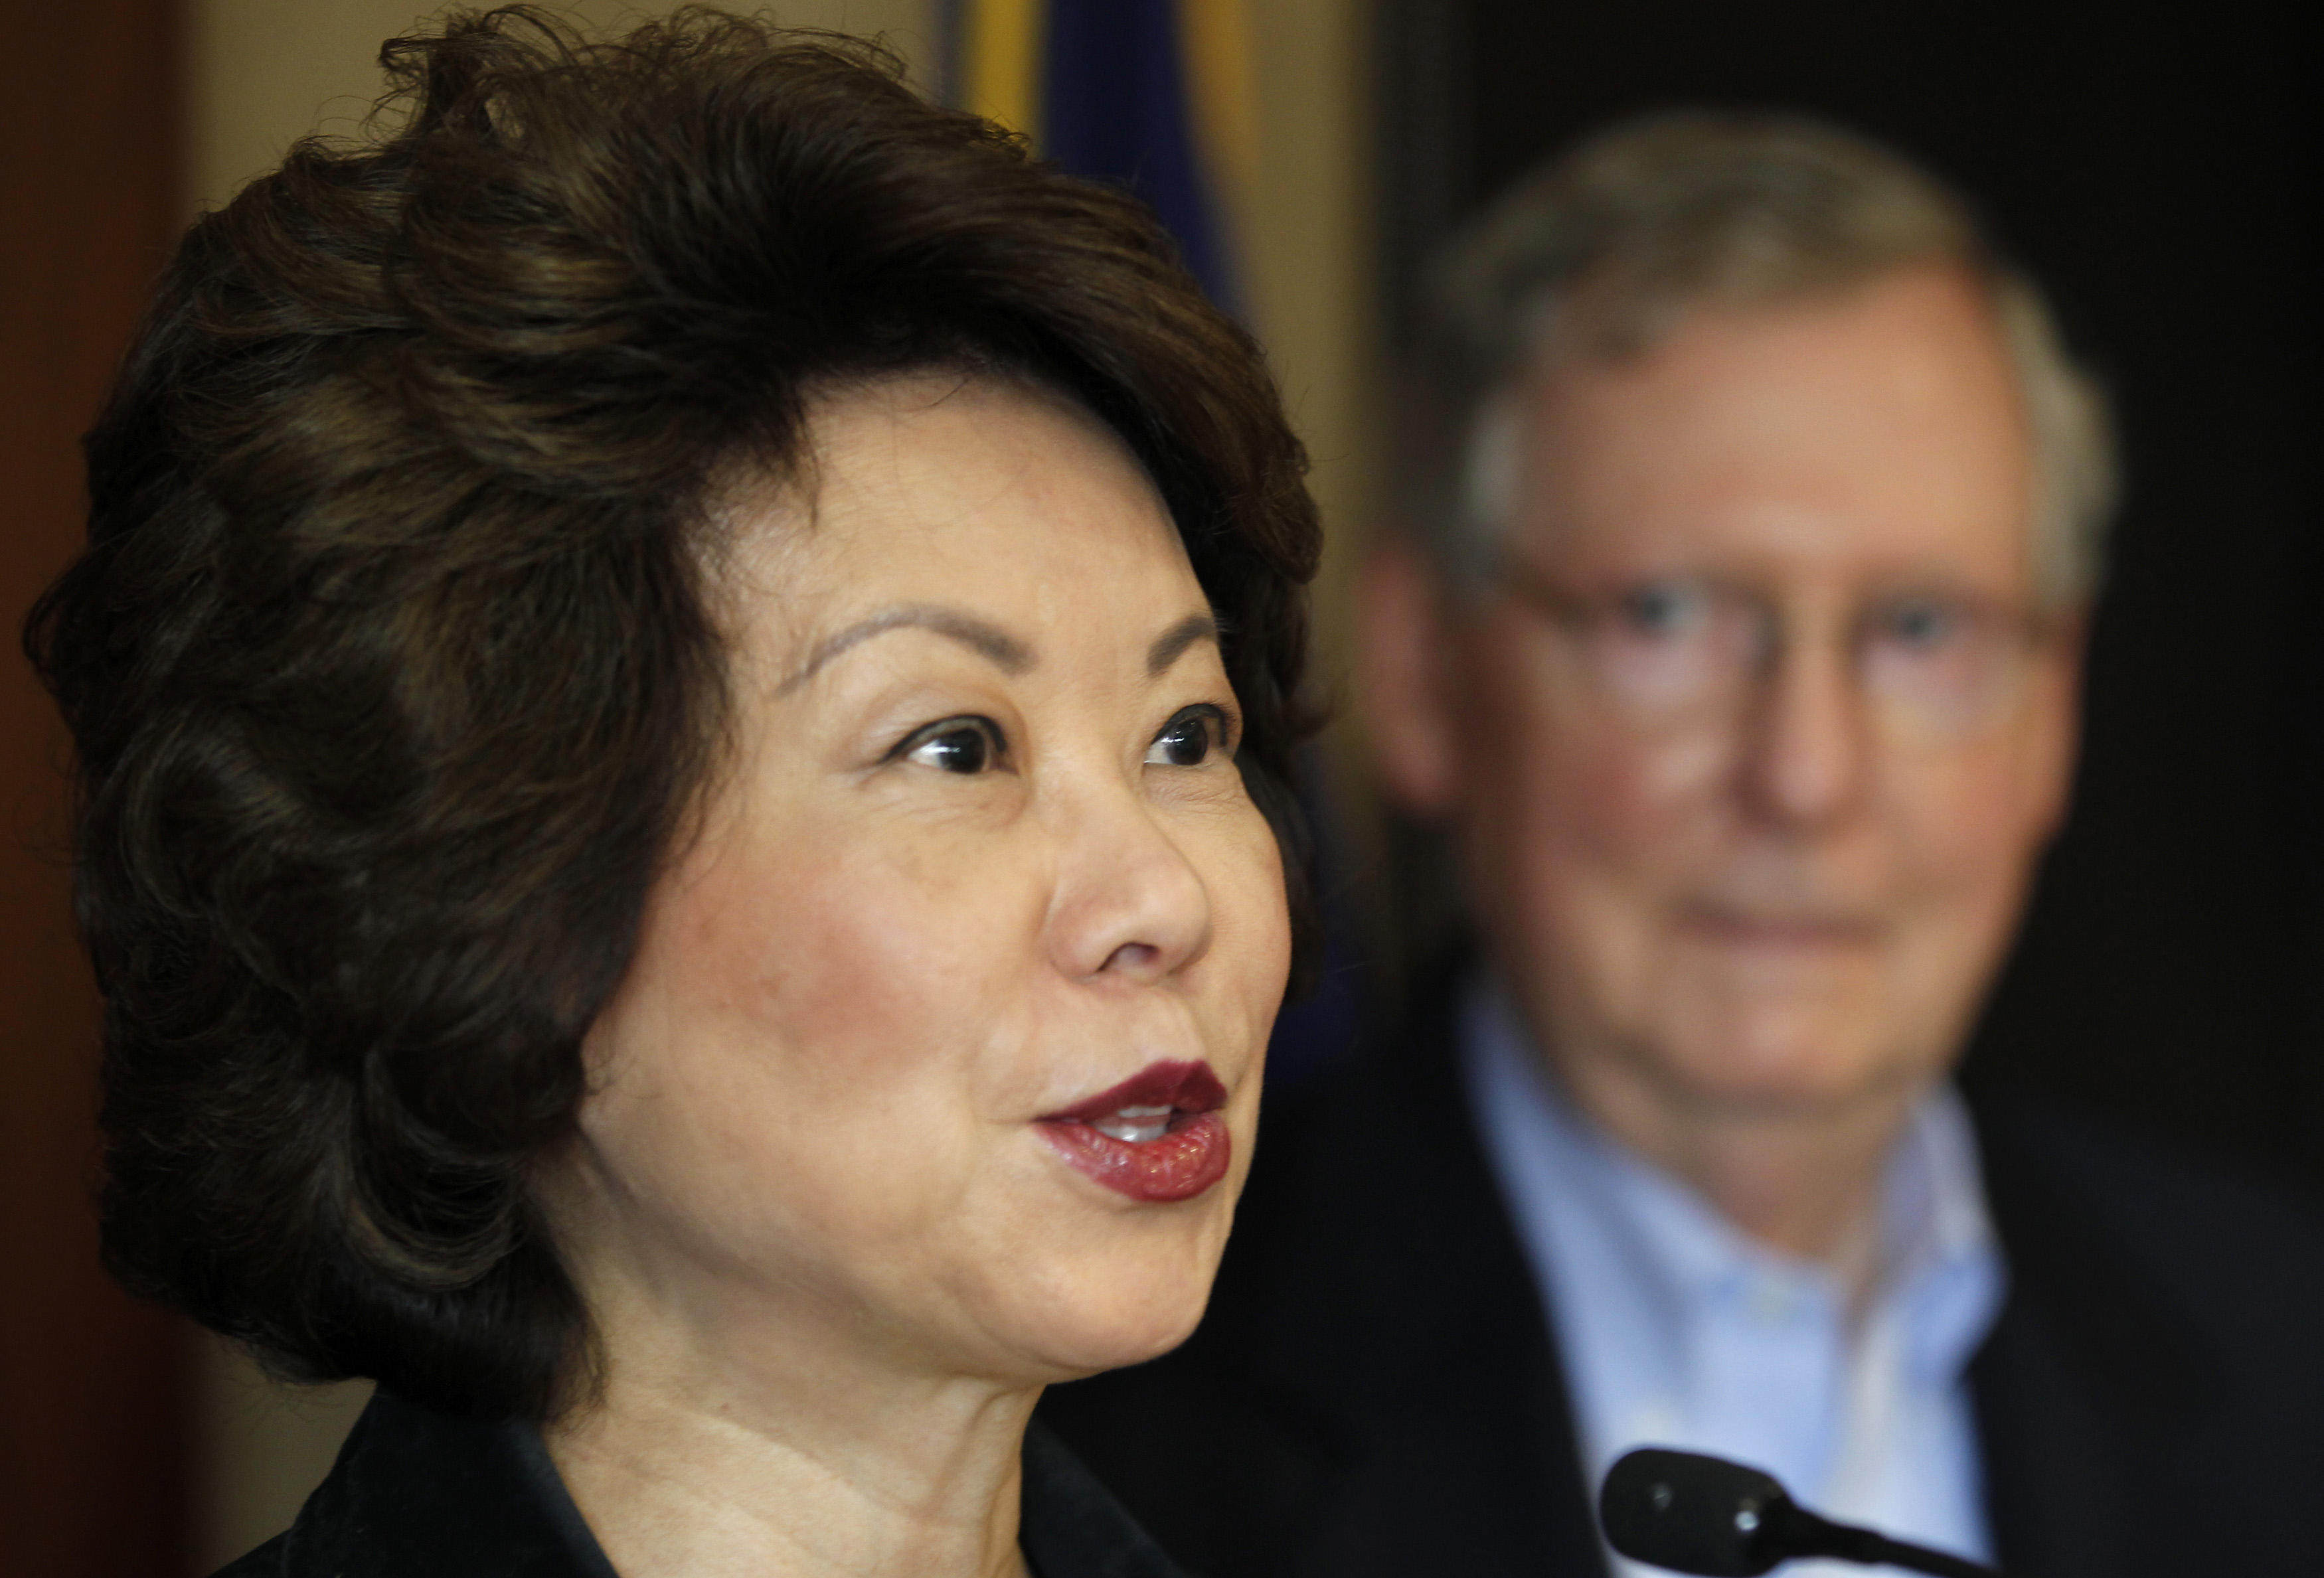 Elaine Chao served in the administrations of two former US presidents, George W. Bush and Donald Trump. Photo: @itsallrealitv/X